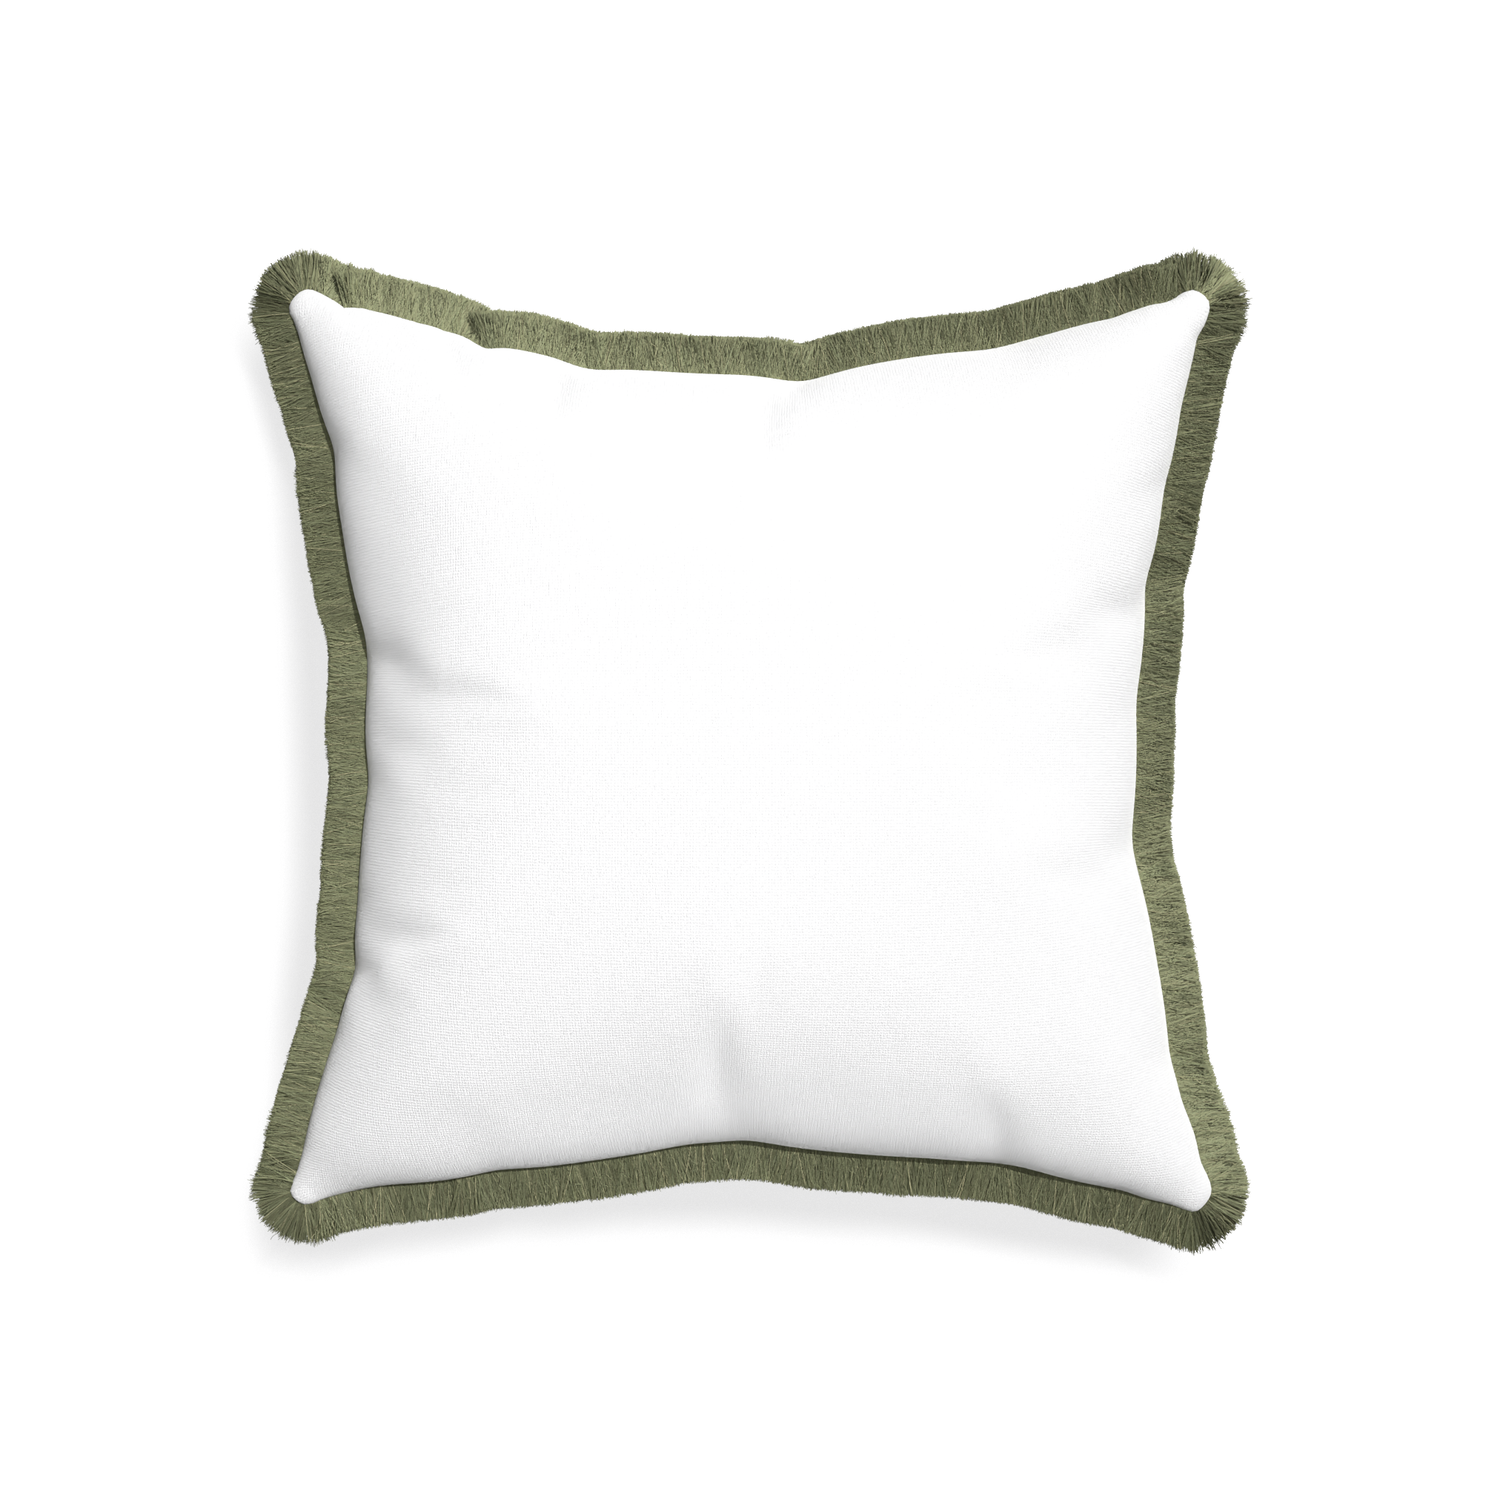 20-square snow custom white cottonpillow with sage fringe on white background